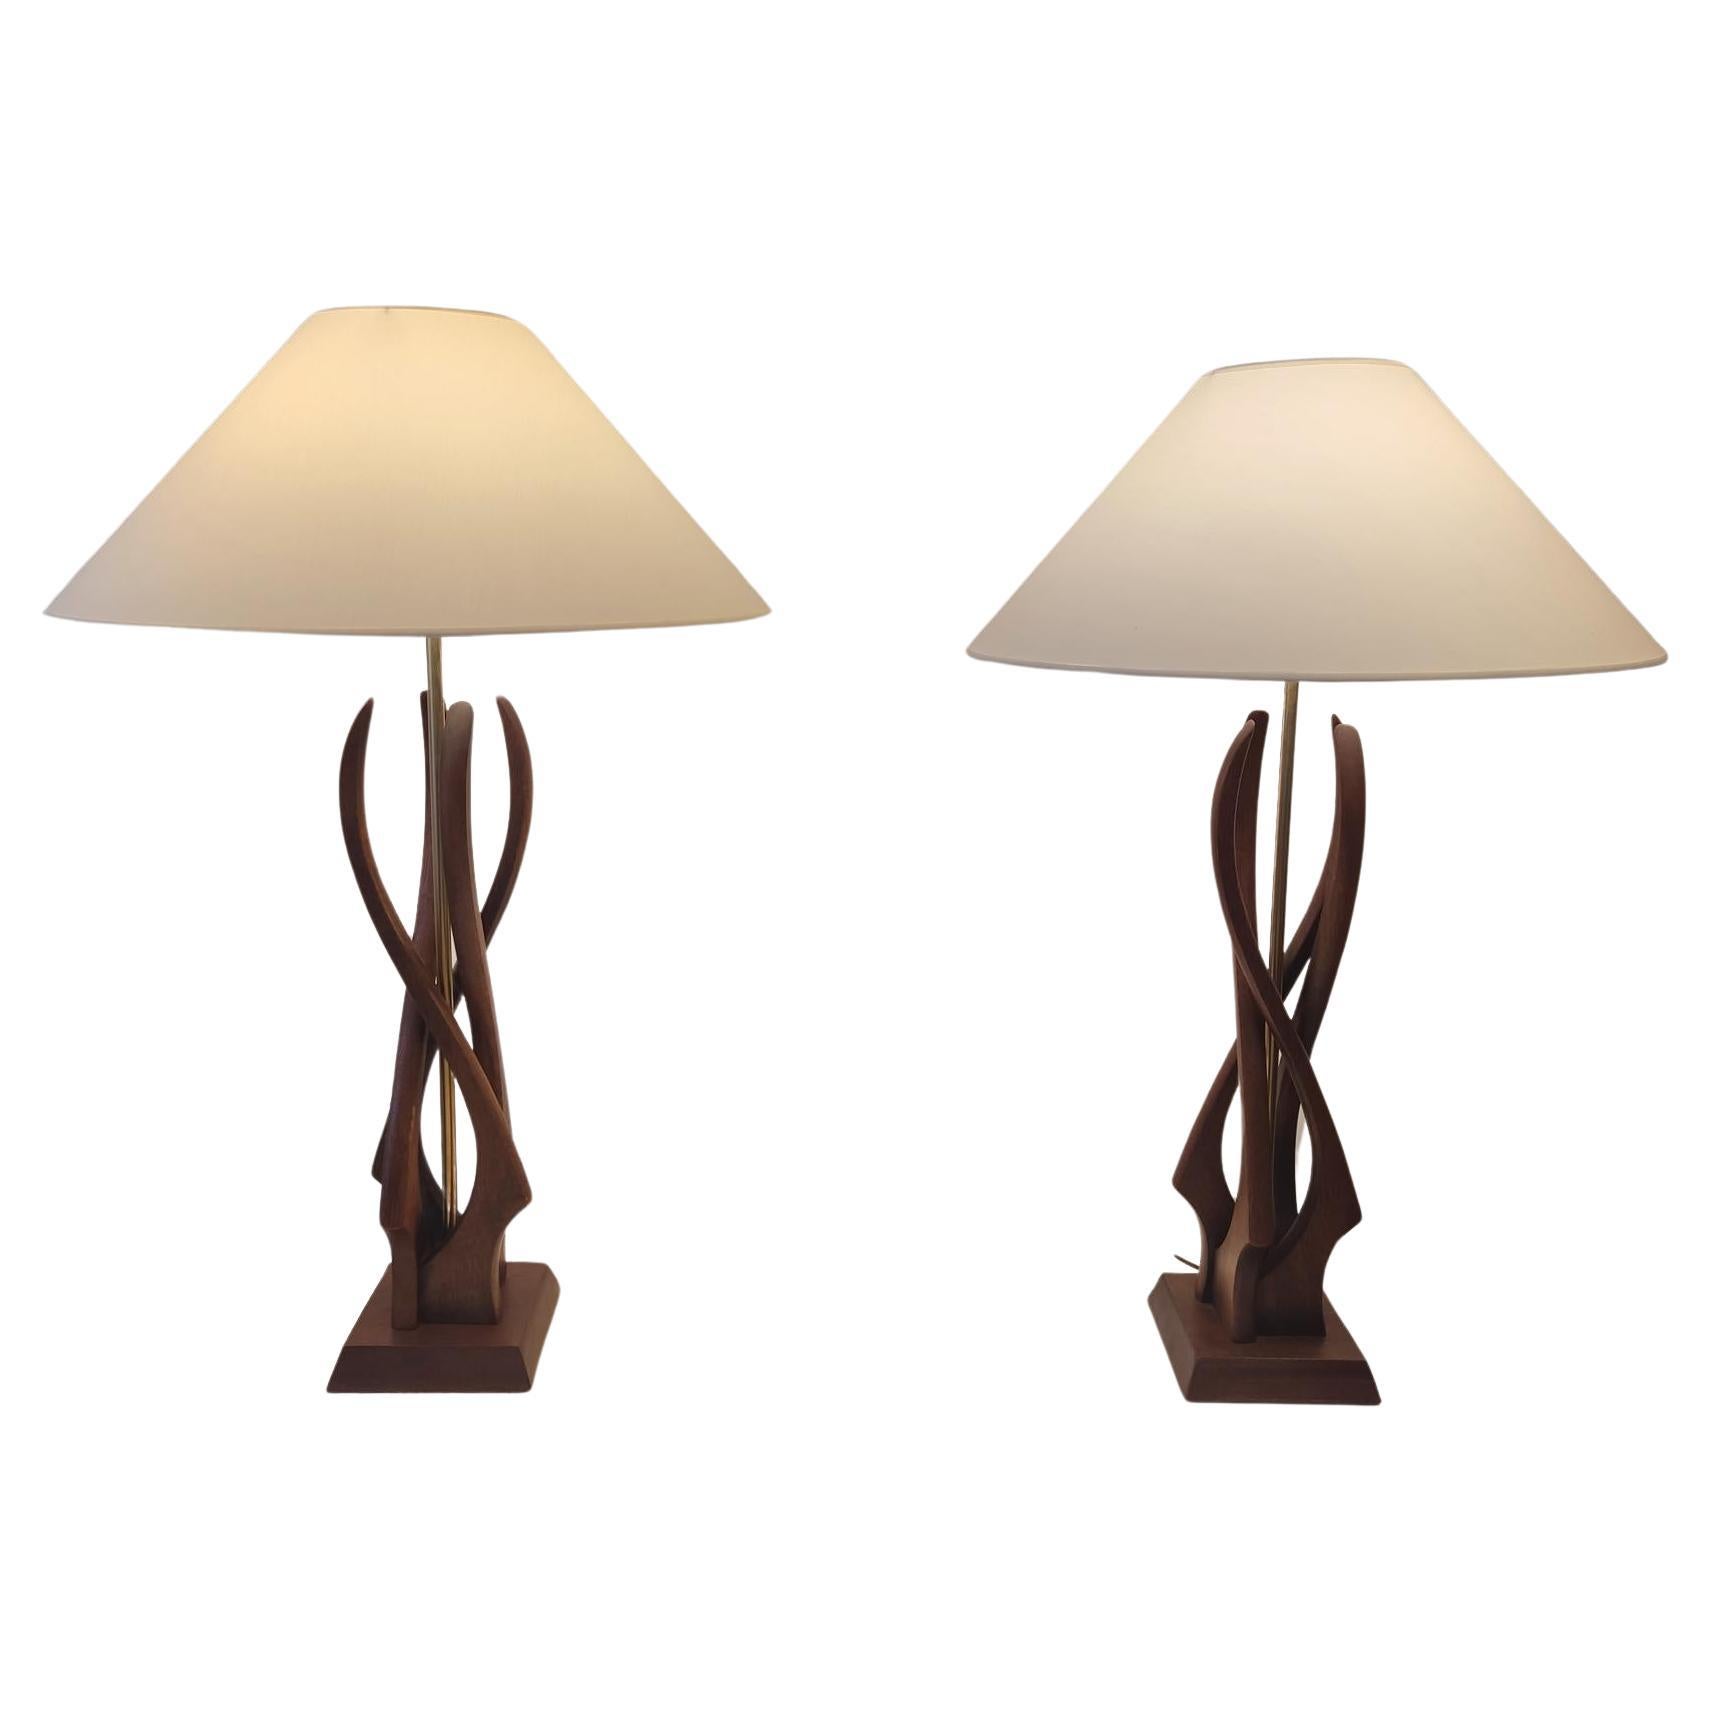 Organic american lamps - 1960s For Sale